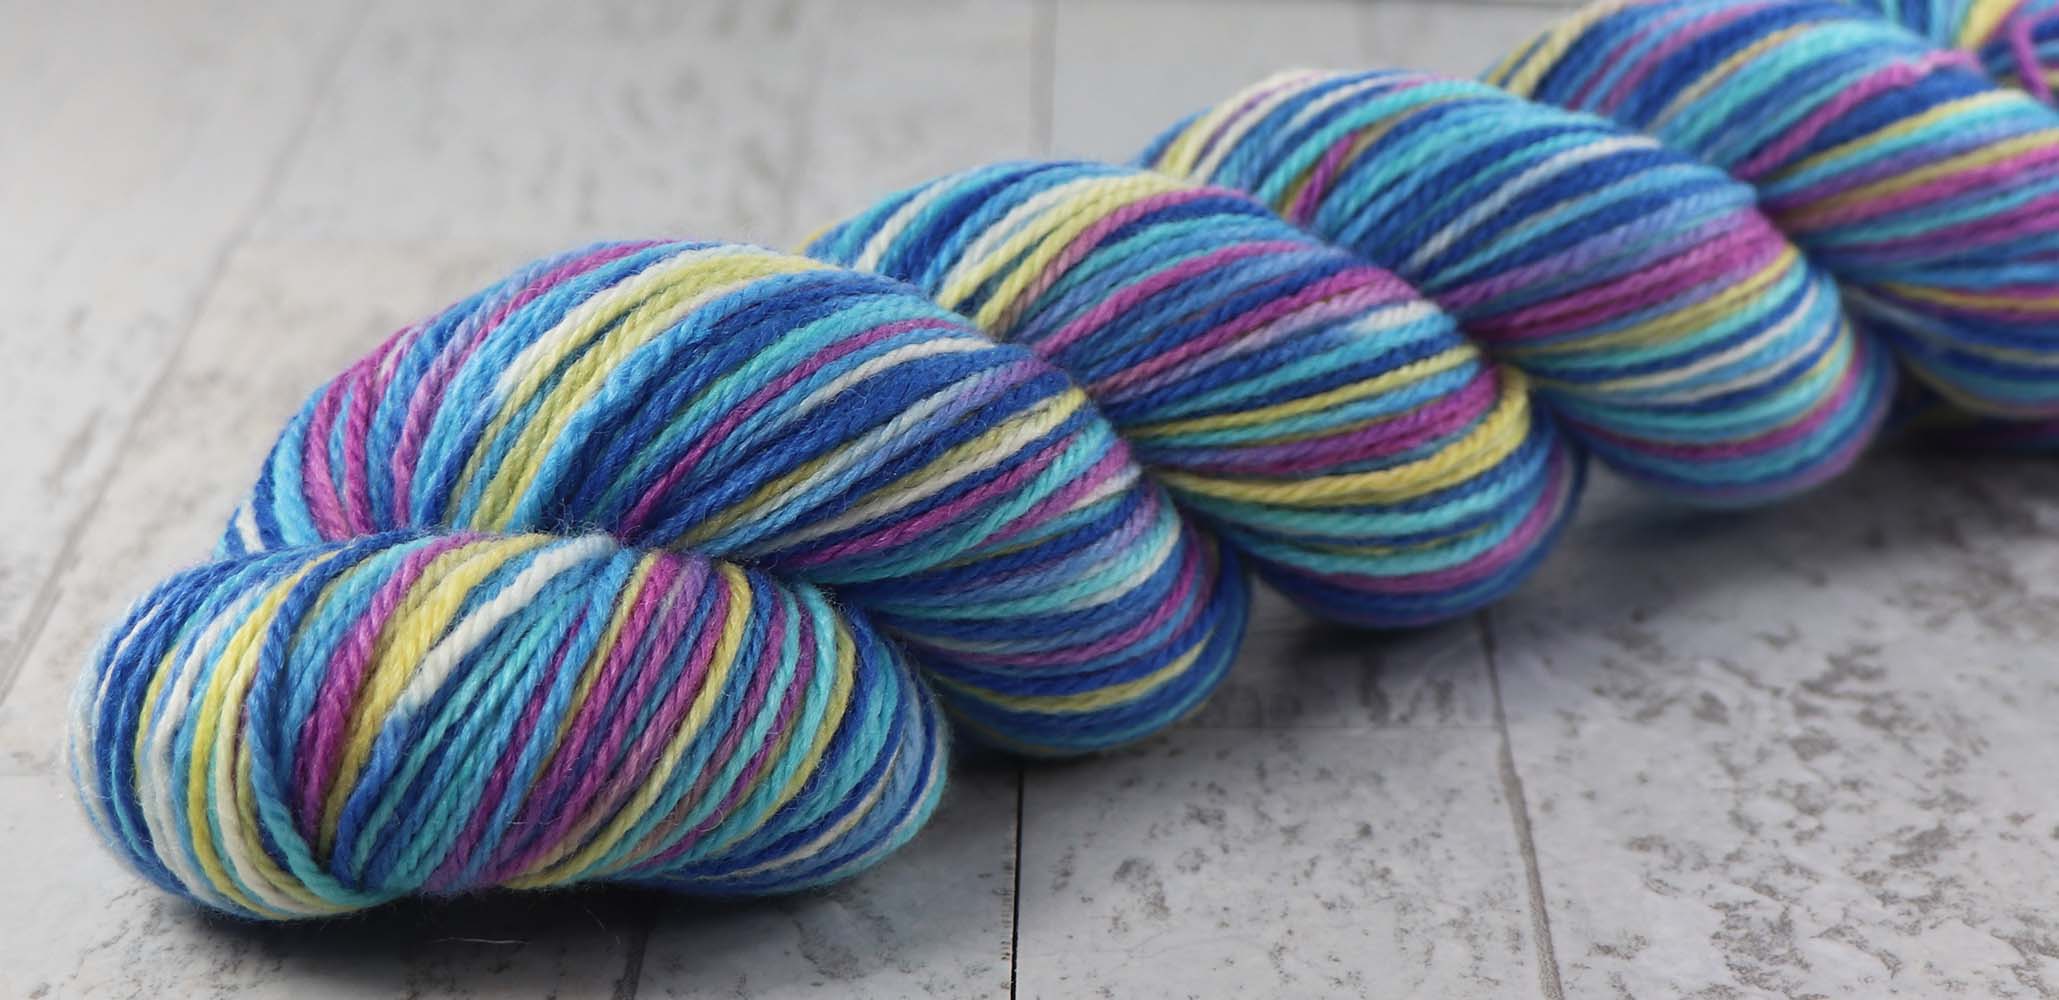 CASTLE CHRISTMAS: Polwarth / Silk - DK weight - Hand dyed Variegated yarn